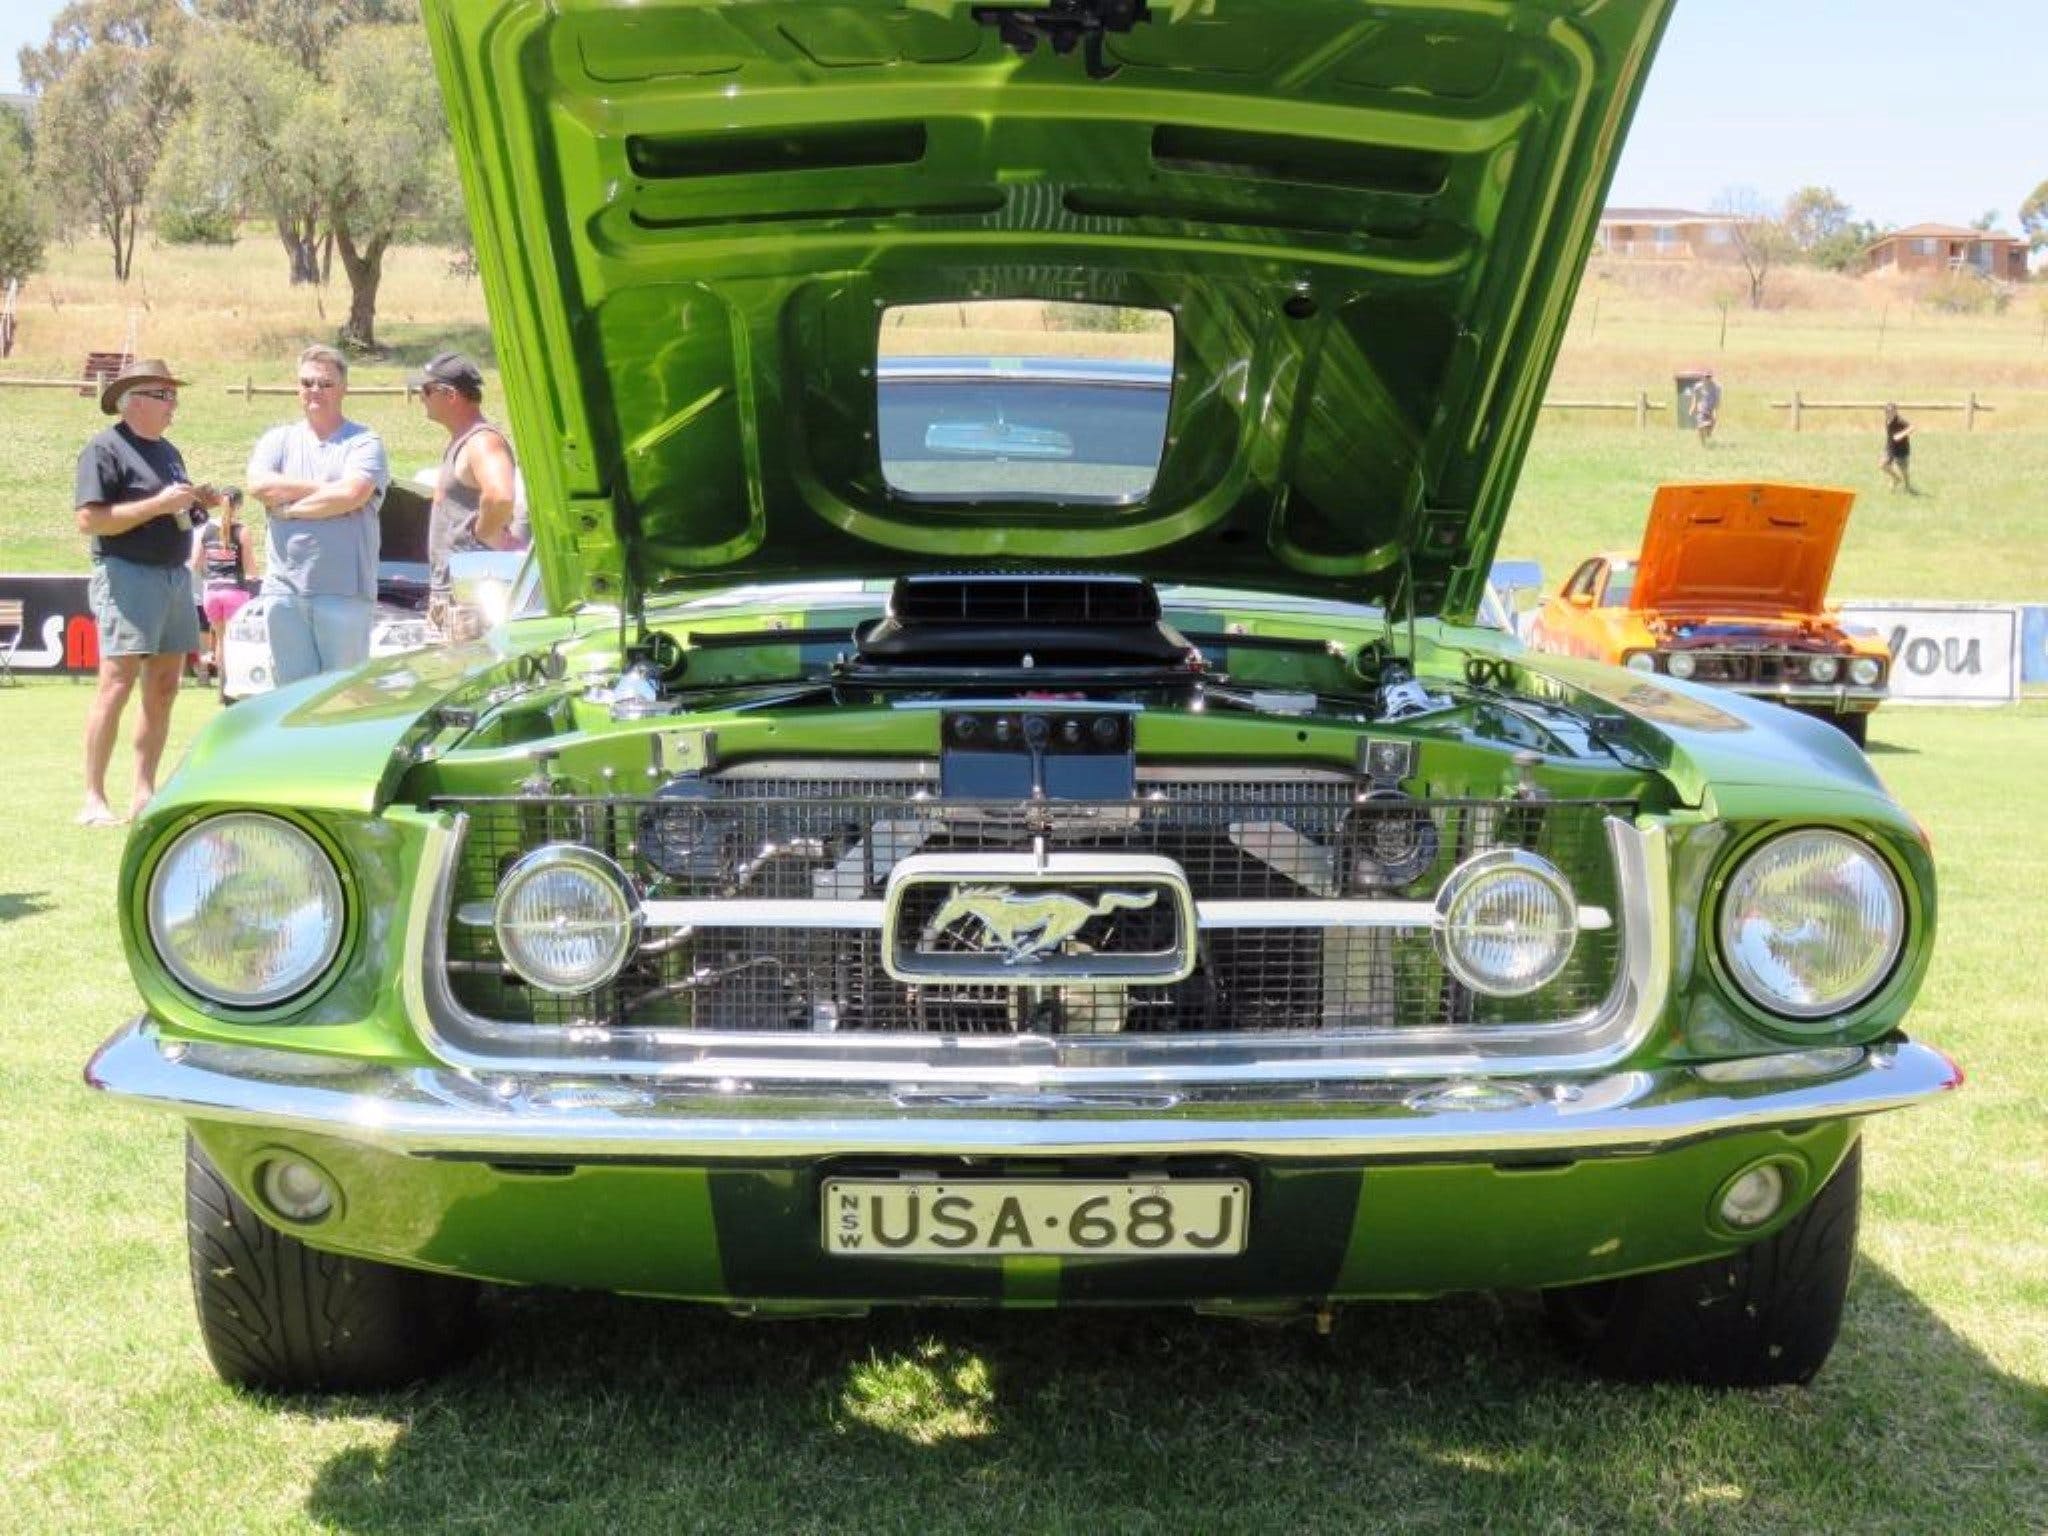 Central West Car Club Charity Show and Shine - Geraldton Accommodation